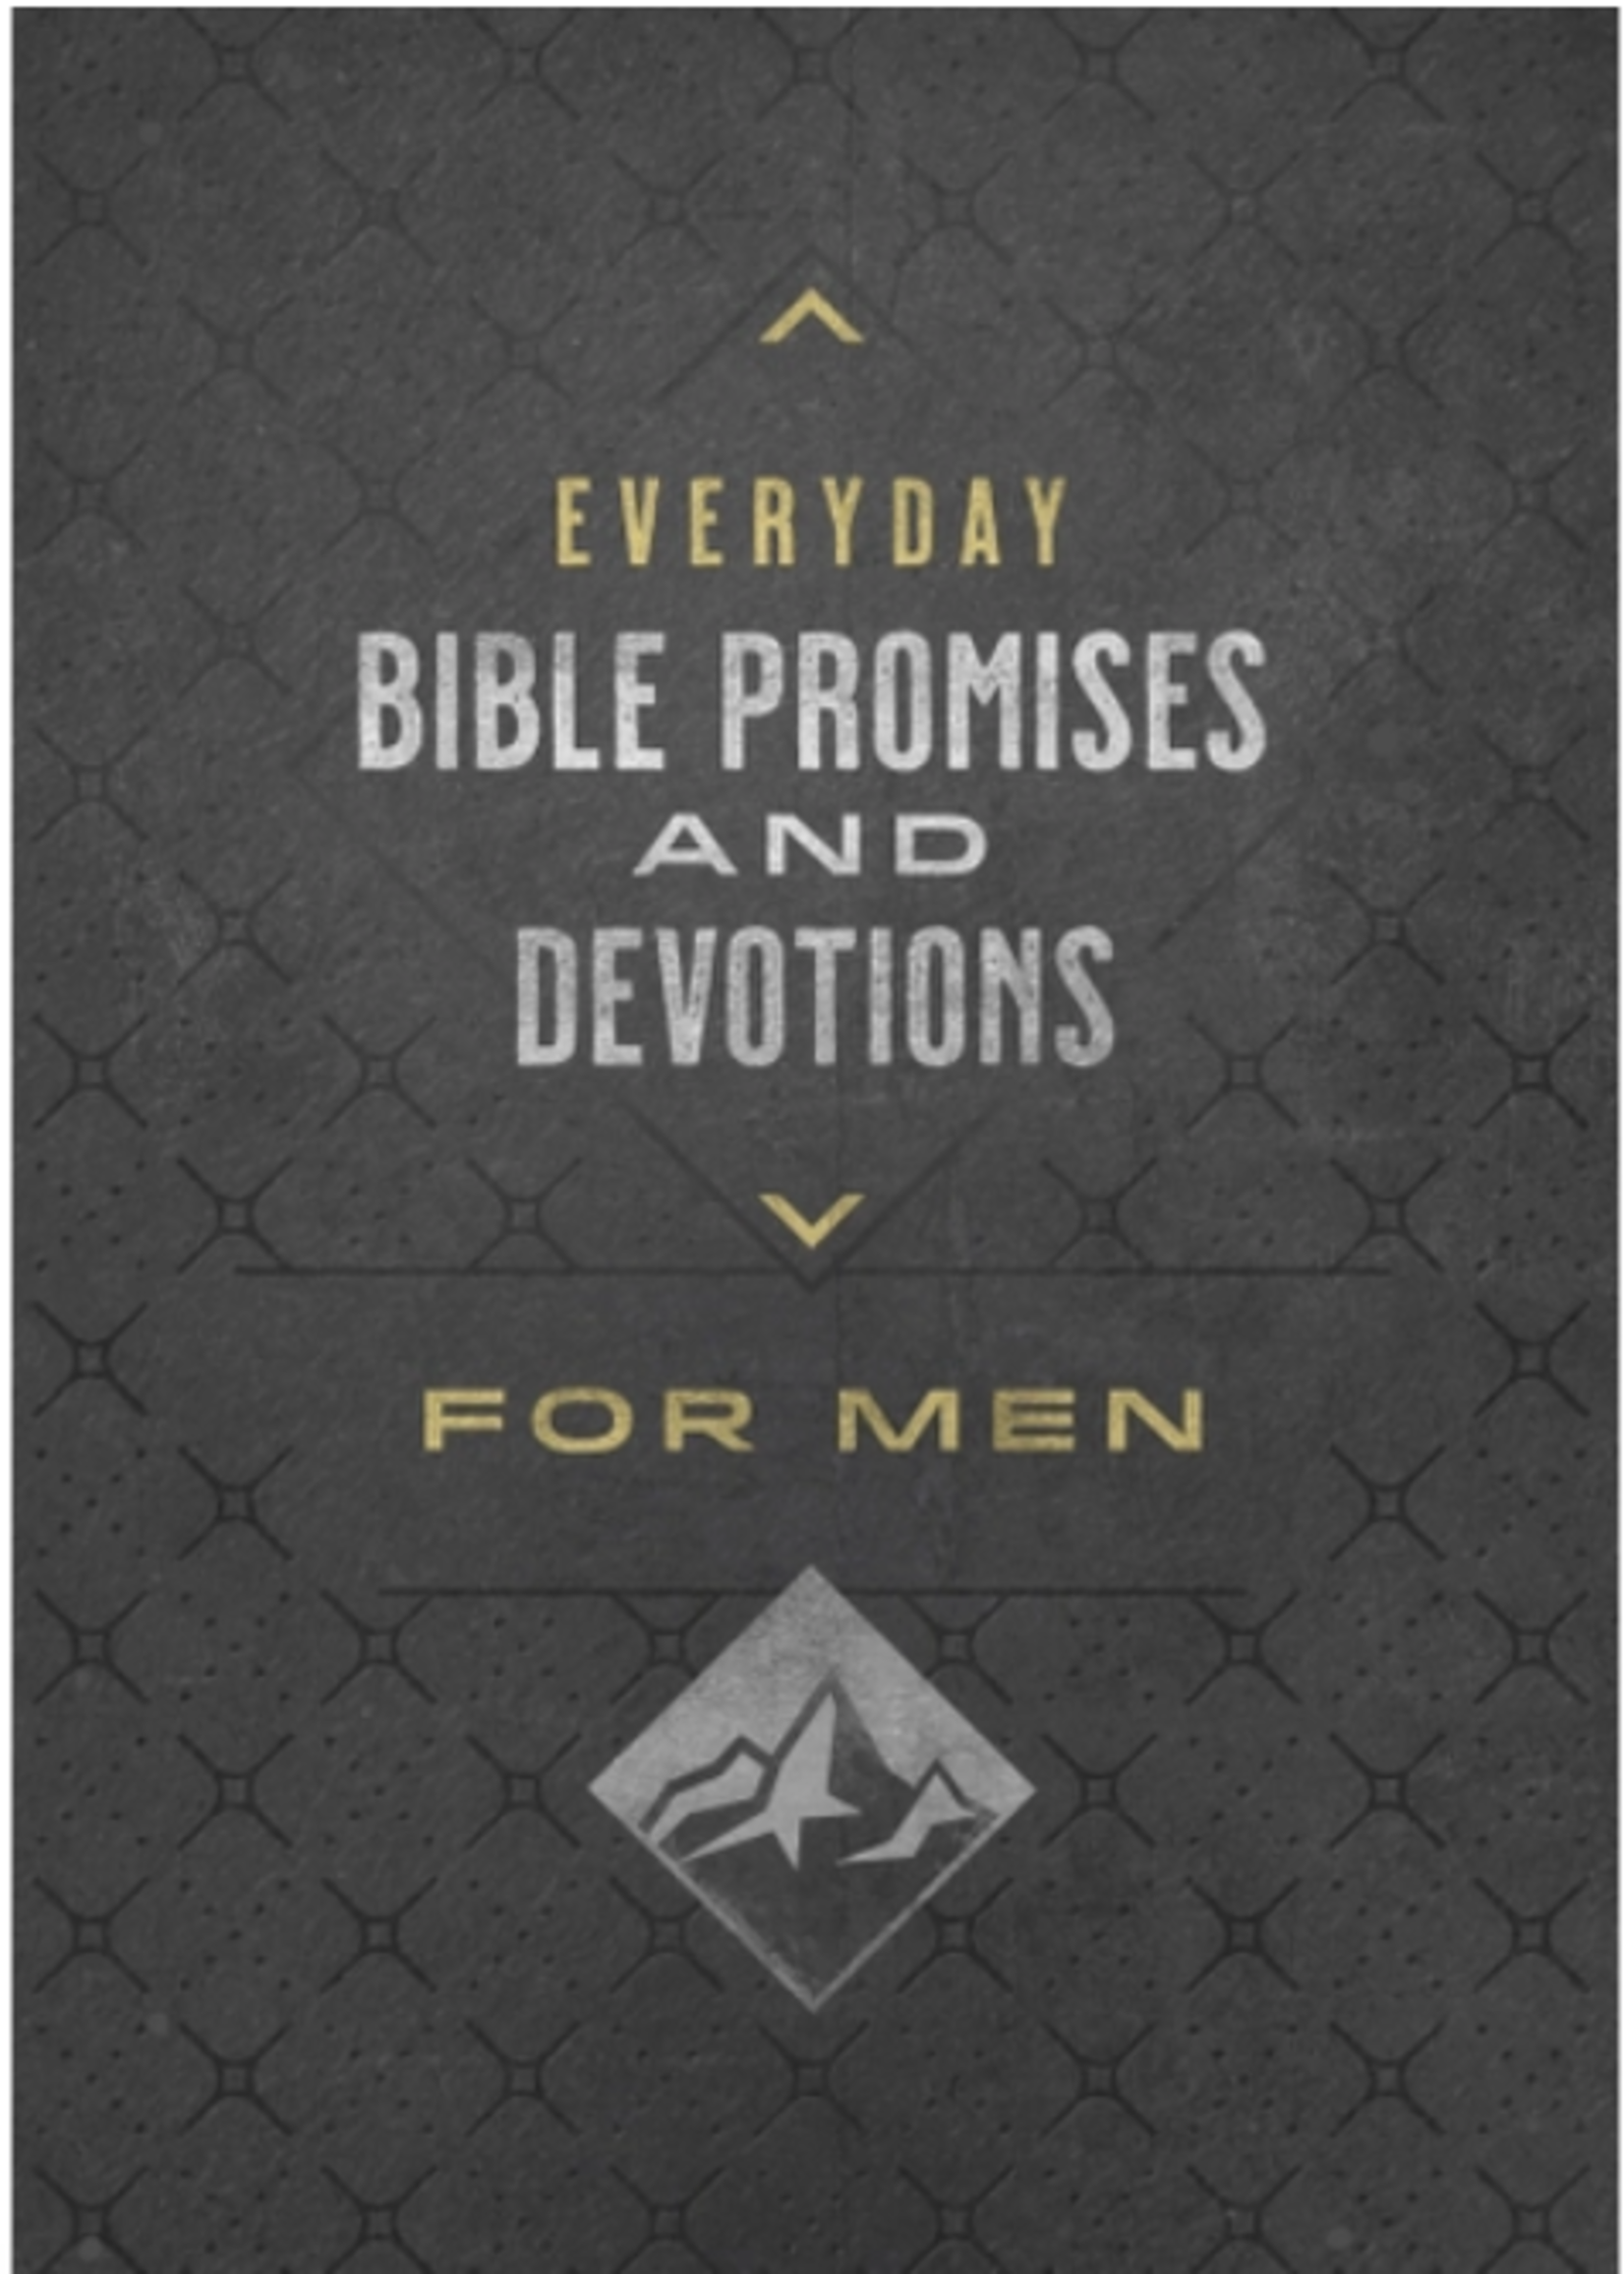 Barbour Publishing Inc. Everyday Bible Promises and Devotions for Men